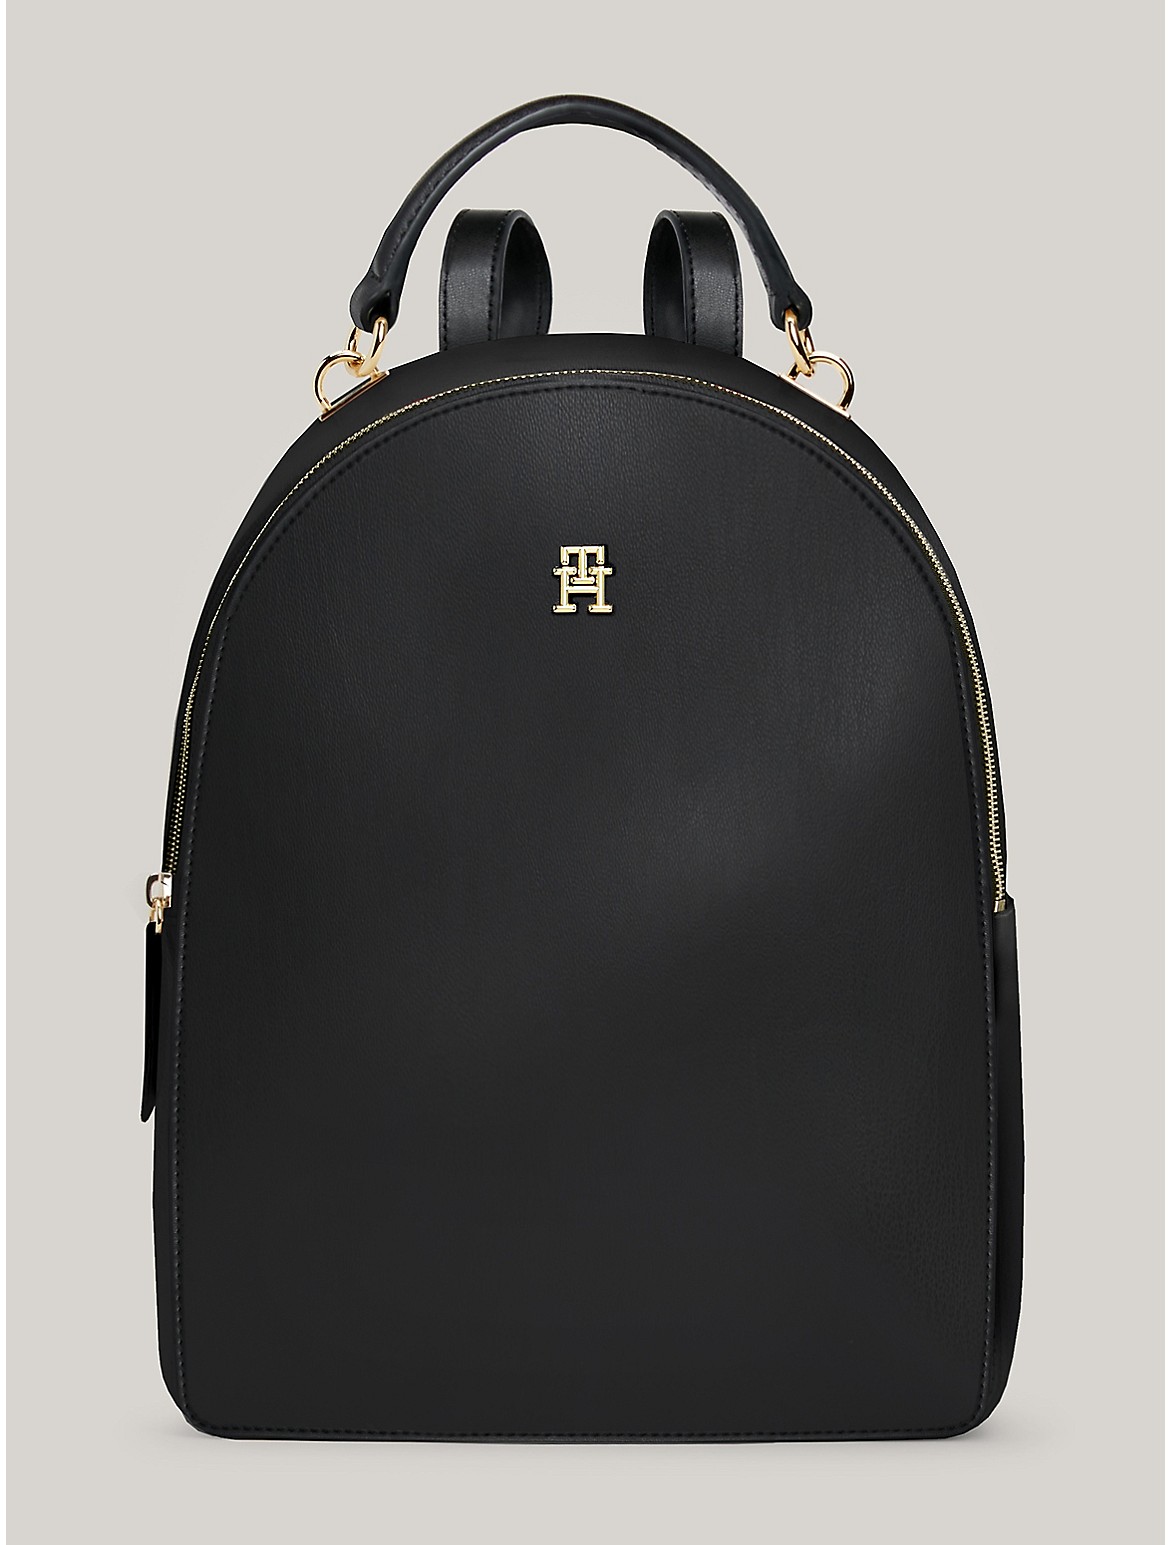 Tommy Hilfiger Women's Solid TH Logo Backpack